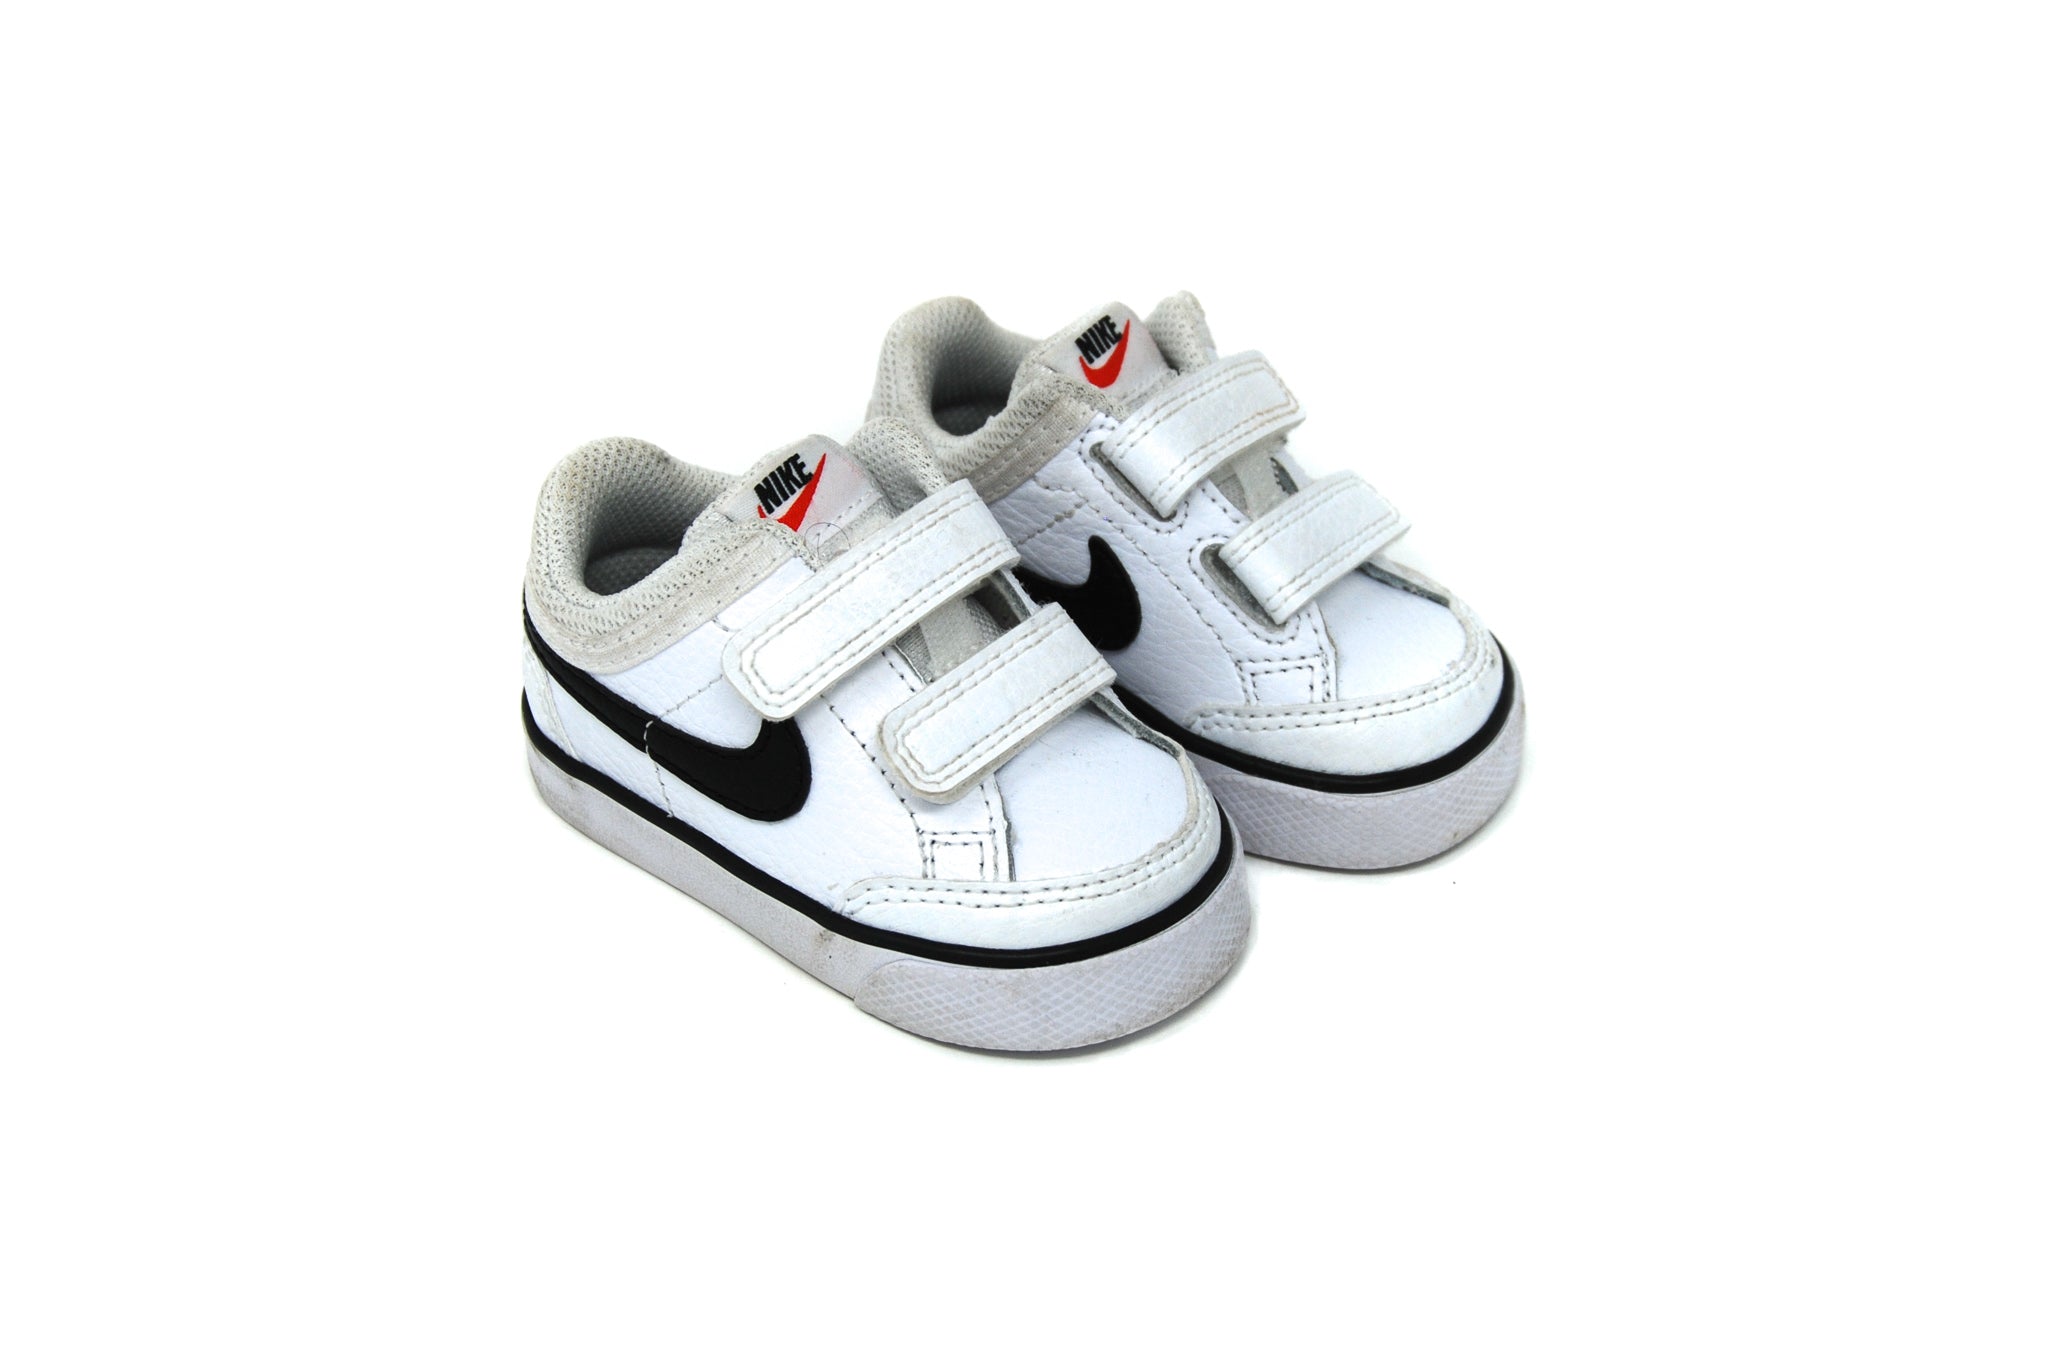 baby boy trainers